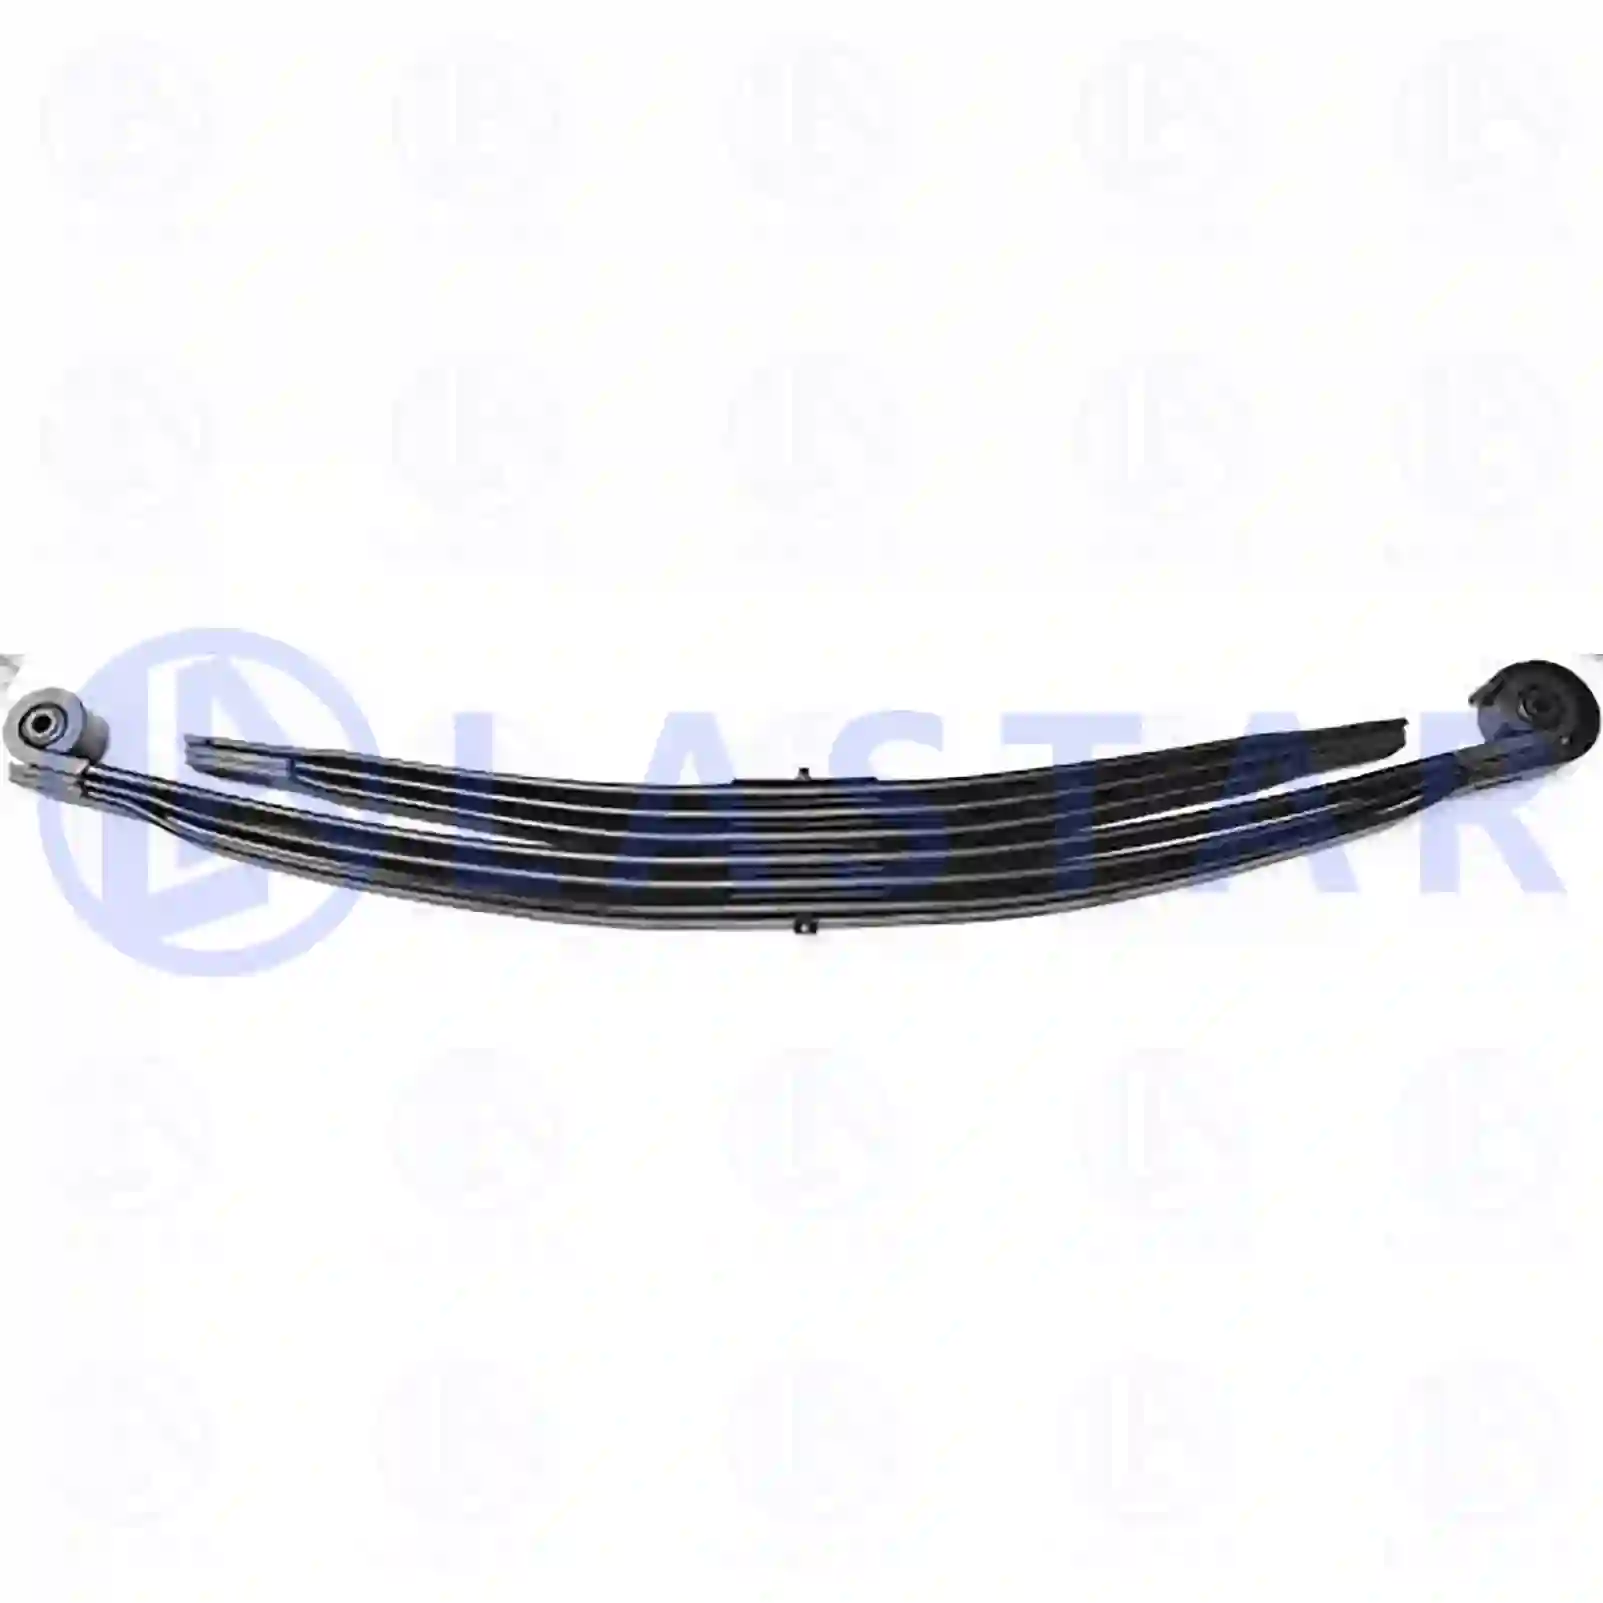 Leaf spring, rear, 77728091, 6523200308 ||  77728091 Lastar Spare Part | Truck Spare Parts, Auotomotive Spare Parts Leaf spring, rear, 77728091, 6523200308 ||  77728091 Lastar Spare Part | Truck Spare Parts, Auotomotive Spare Parts